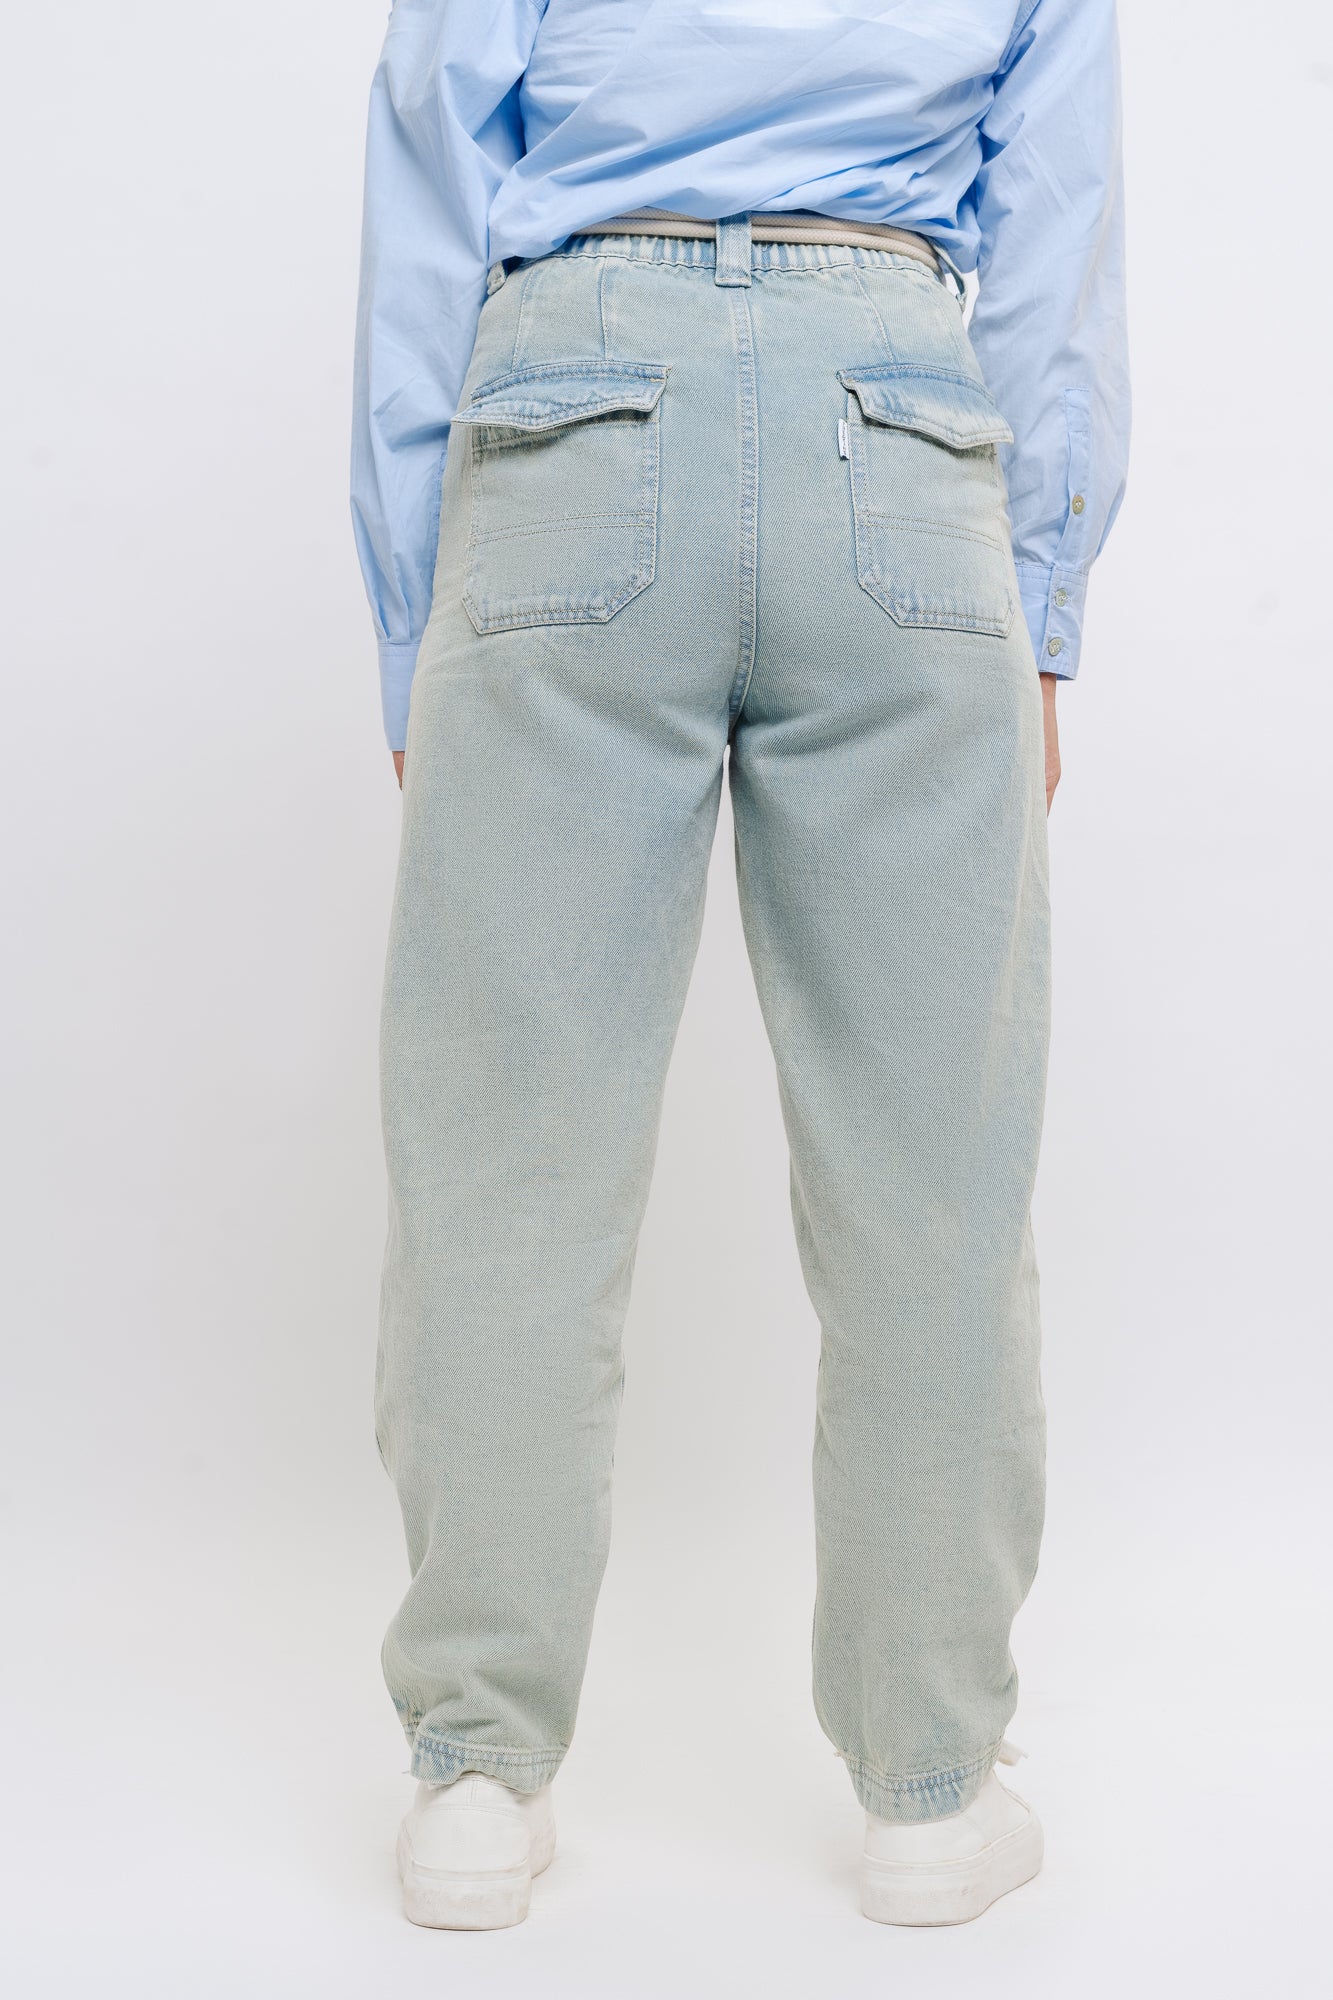 ELONGATED POCKET TINTED JEANS